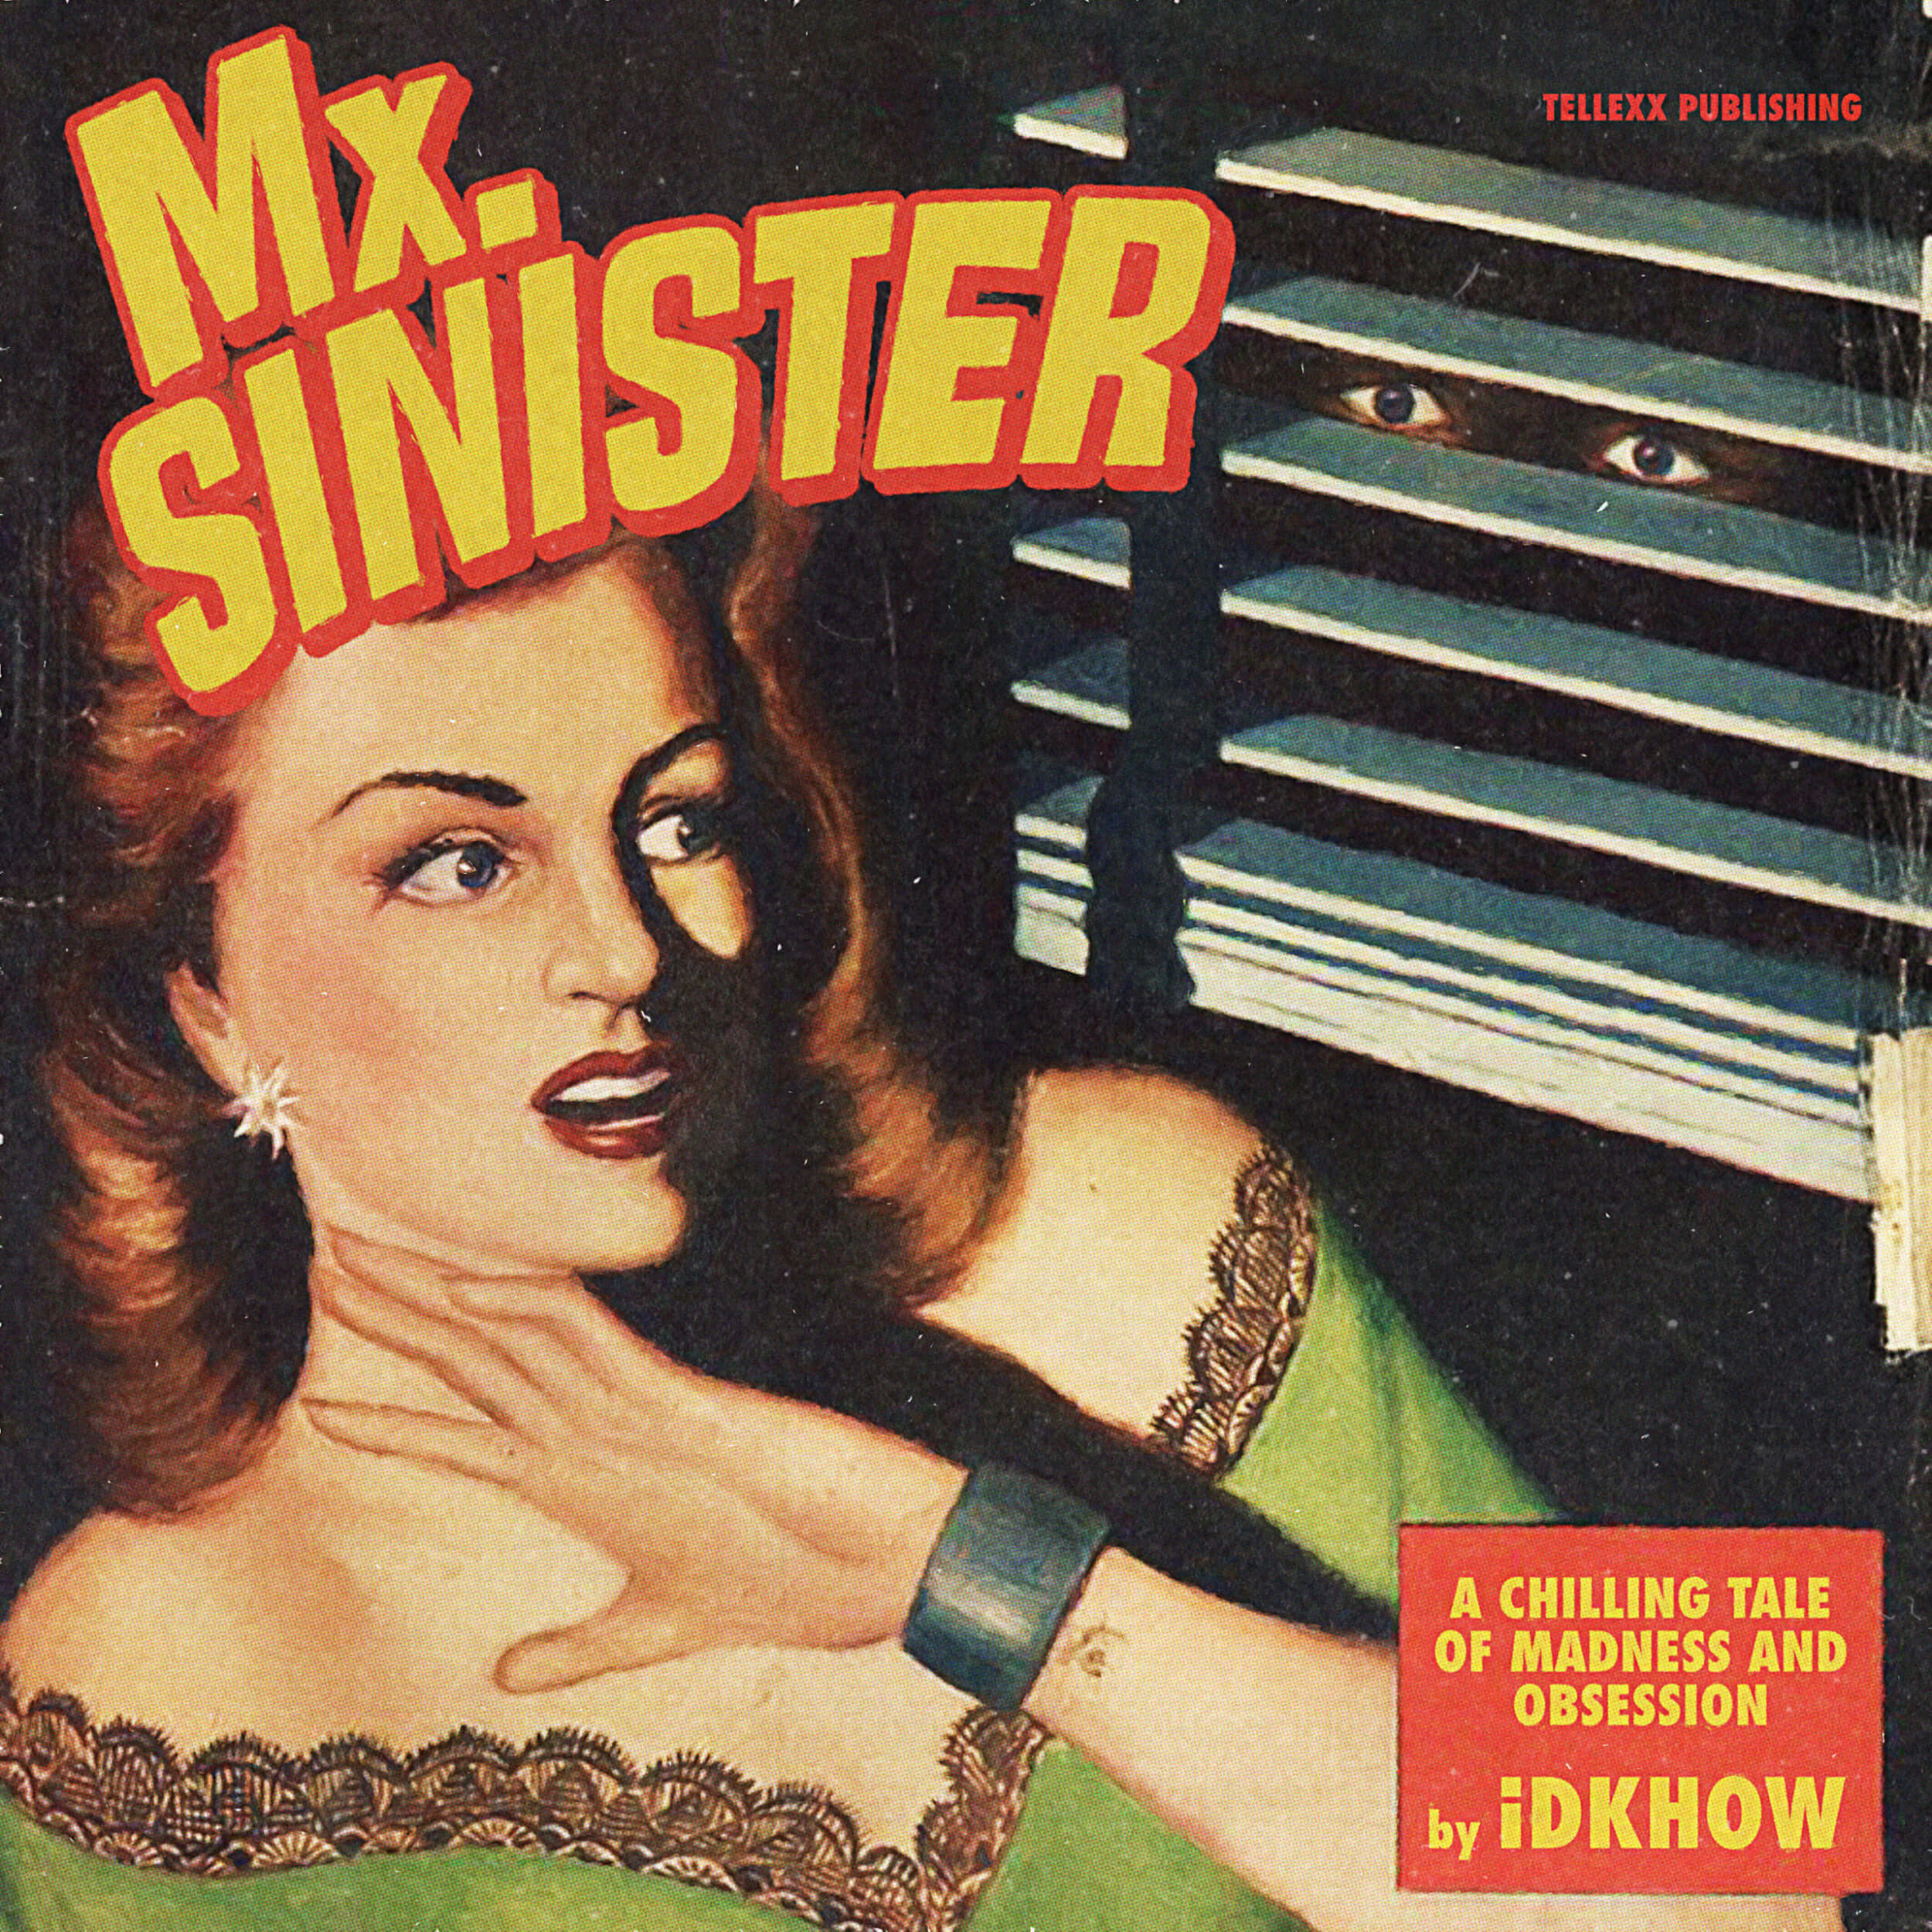 Featured image for “Mx. Sinister”